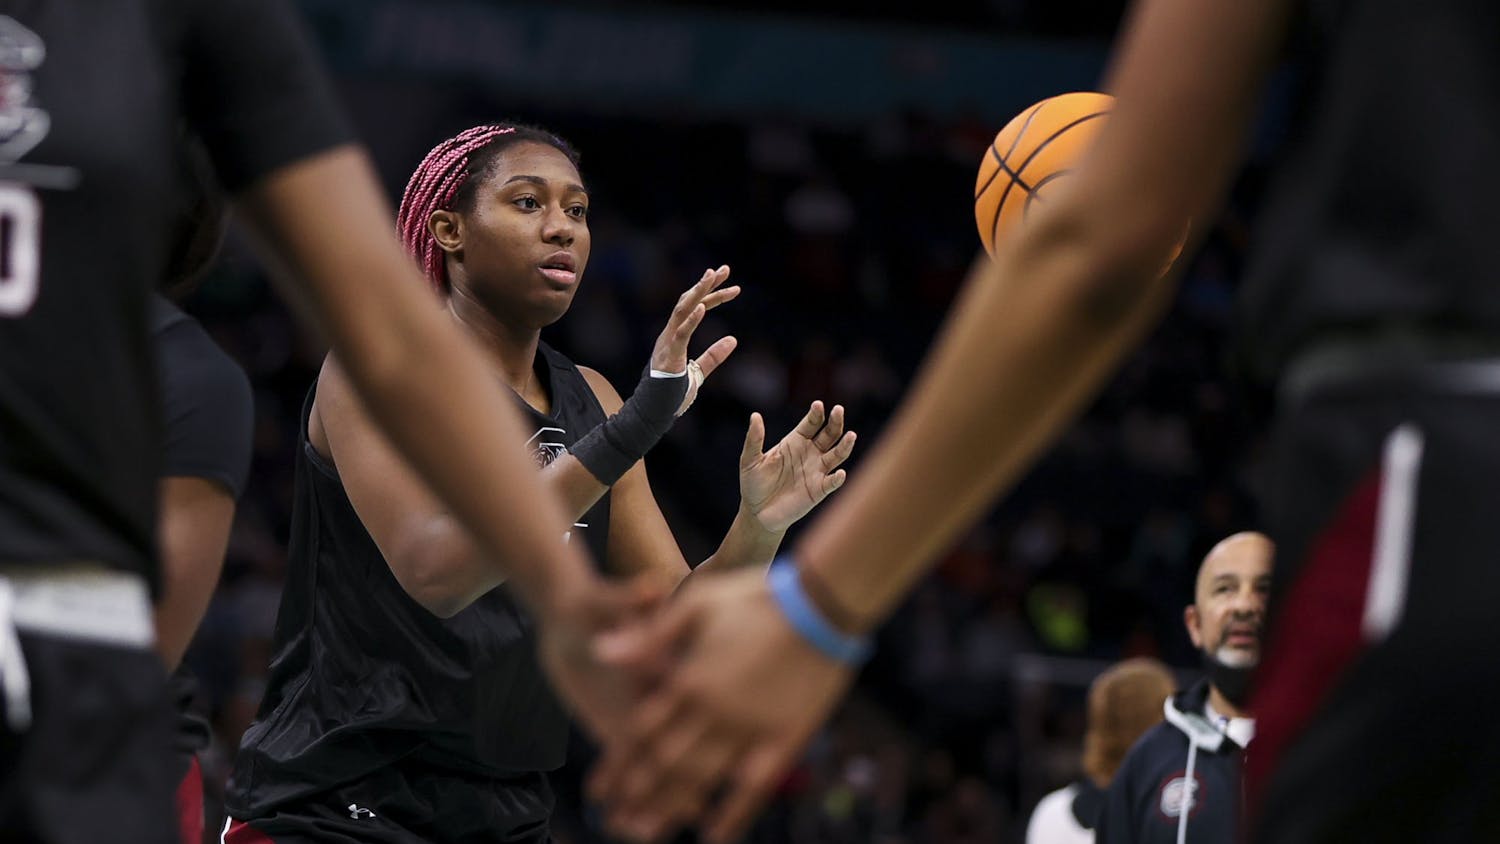 South Carolina women's basketball prepares for the national championship during an open practice and media availabilities in Minneapolis, MN on Saturday, April 2, 2022.